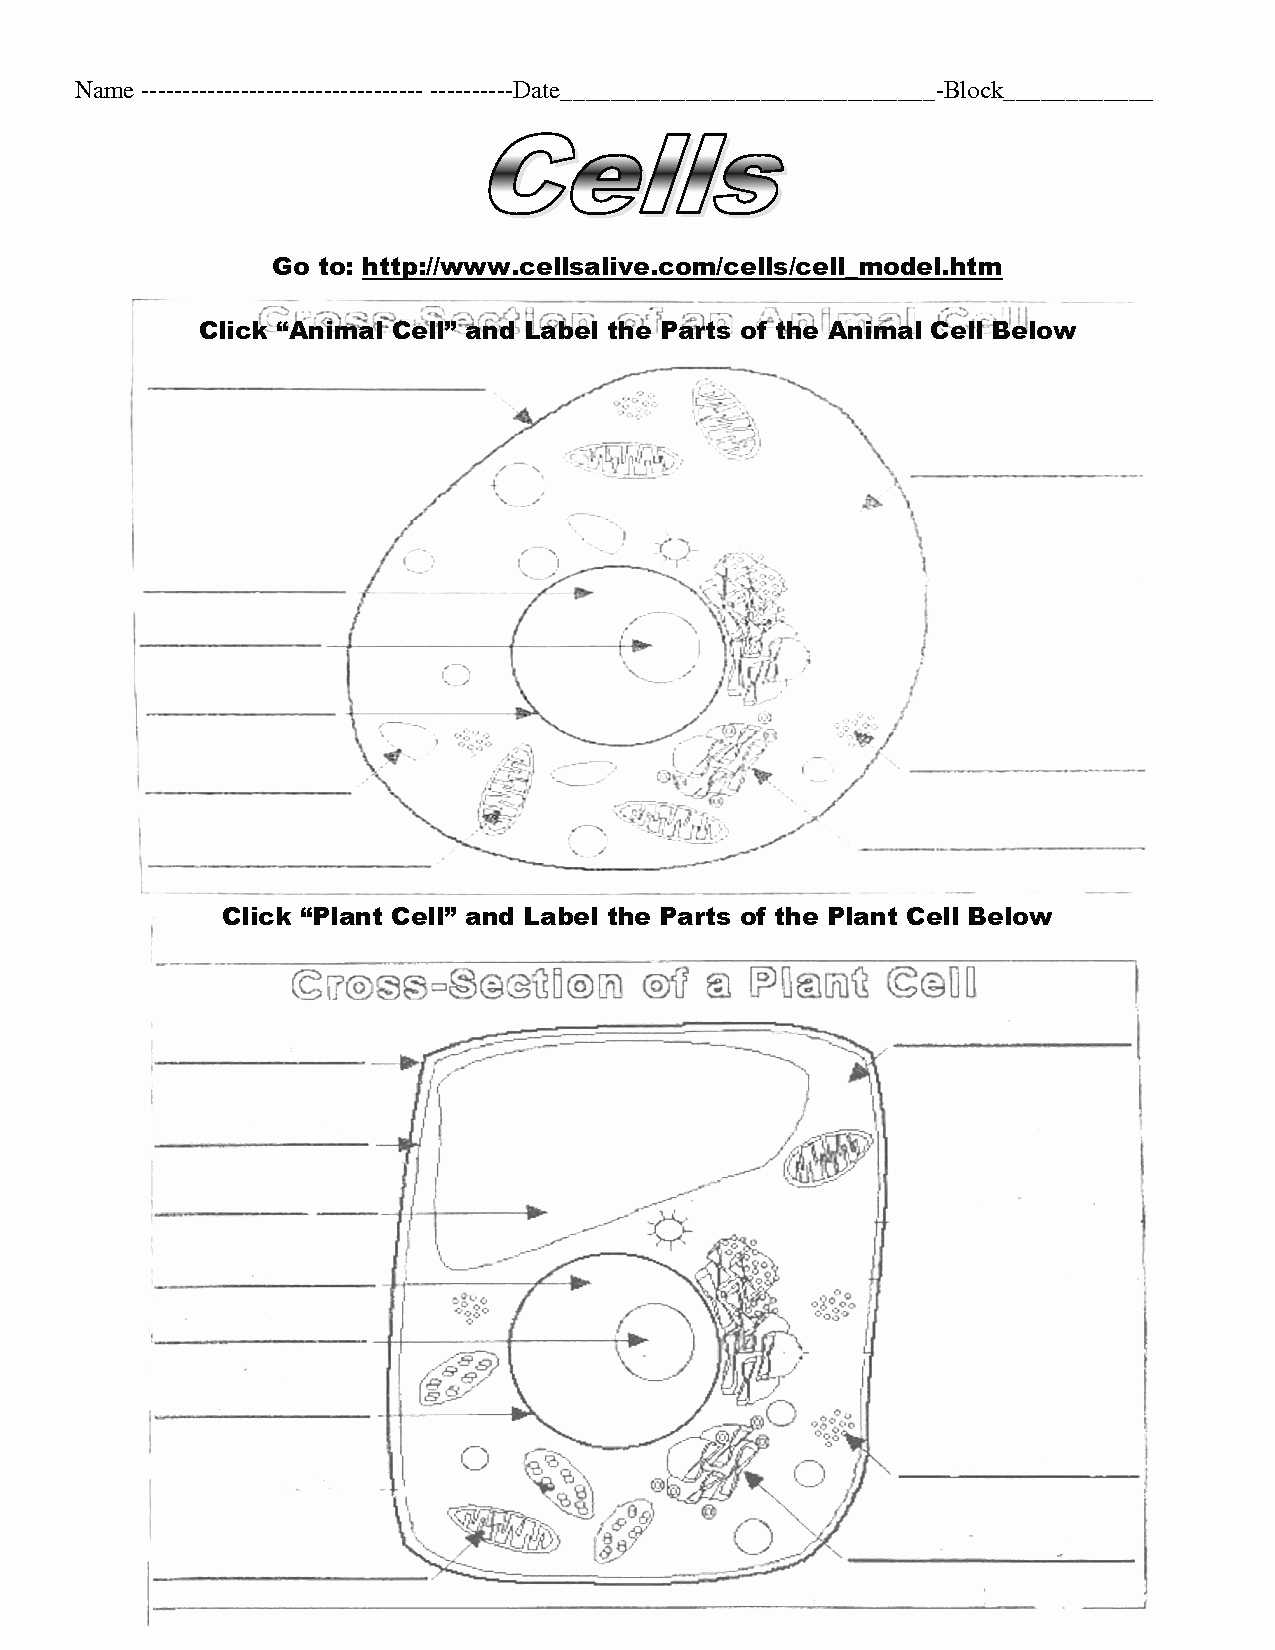 Cell Cycle Worksheet Answers Biology and Cells Alive Cell Cycle Worksheet Answers Cells Alive Worksheet